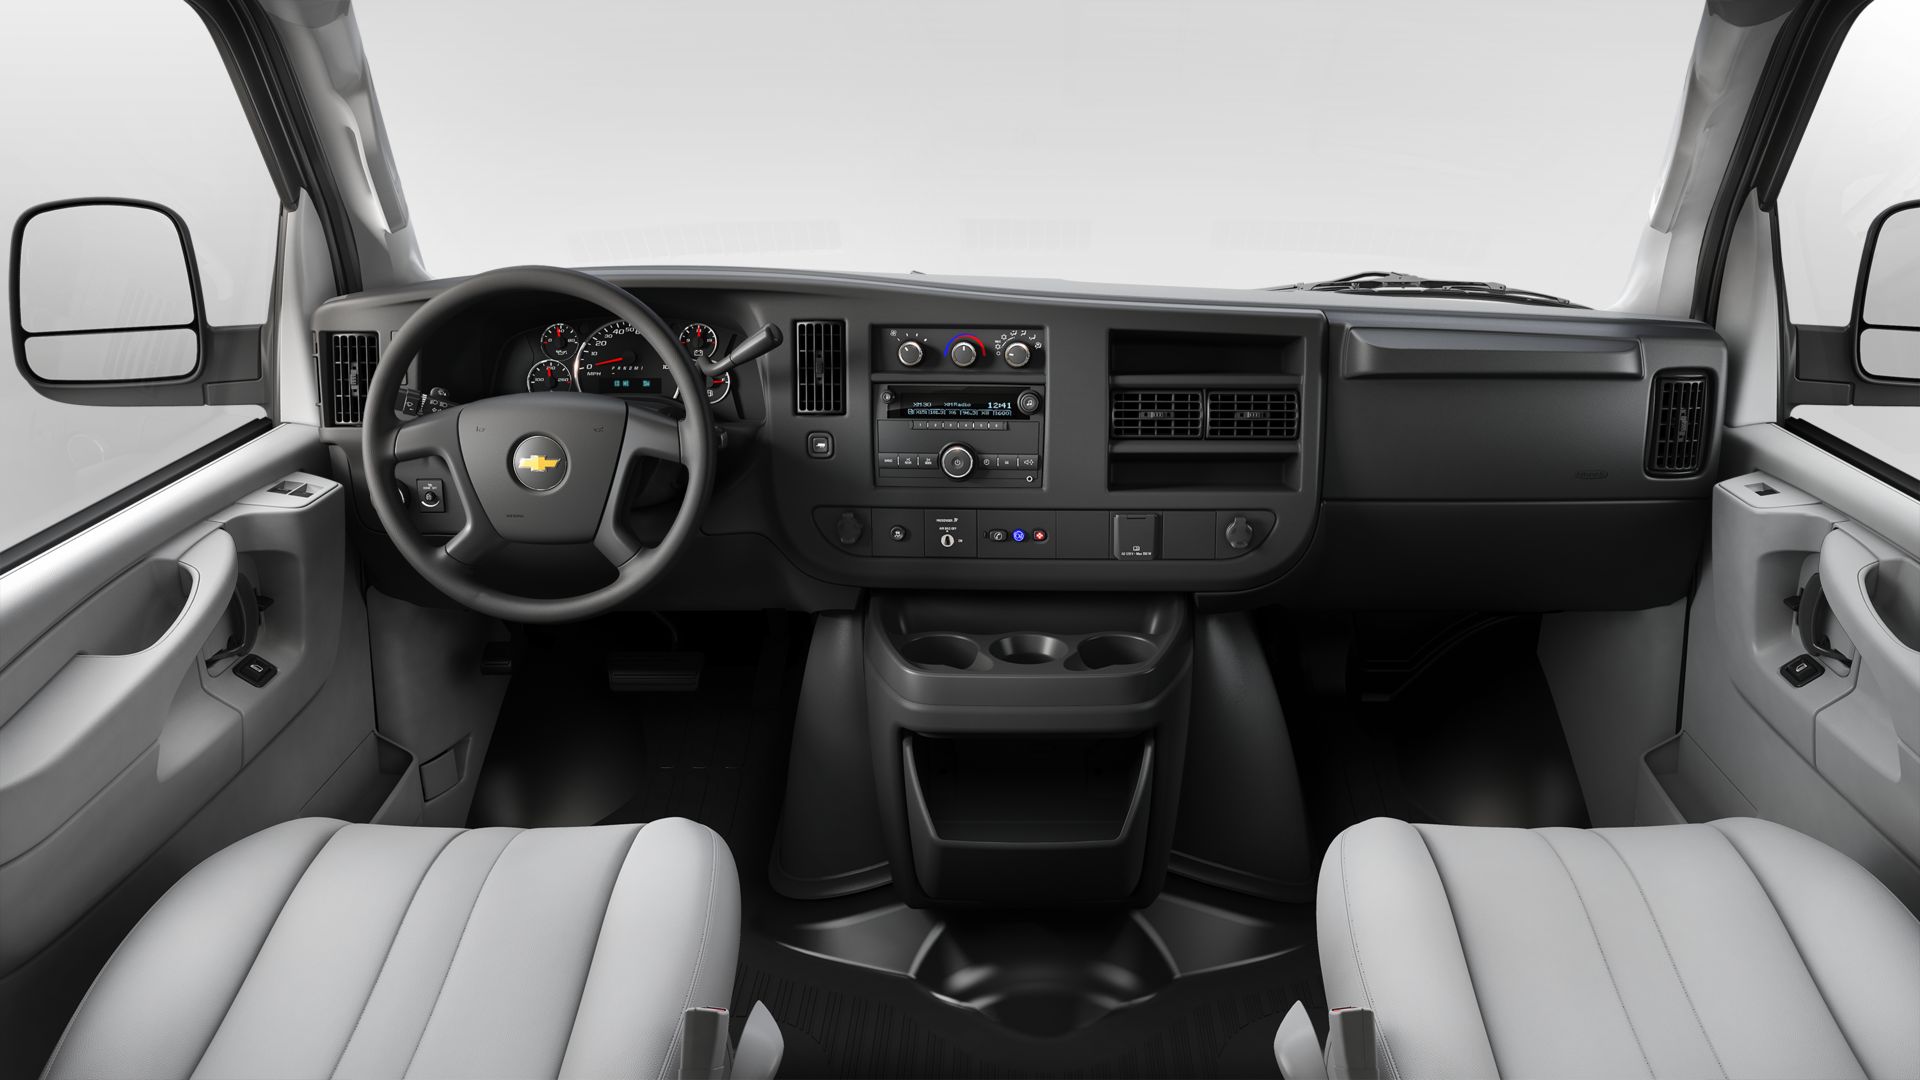 2022 Chevy Express Configurator Now Live